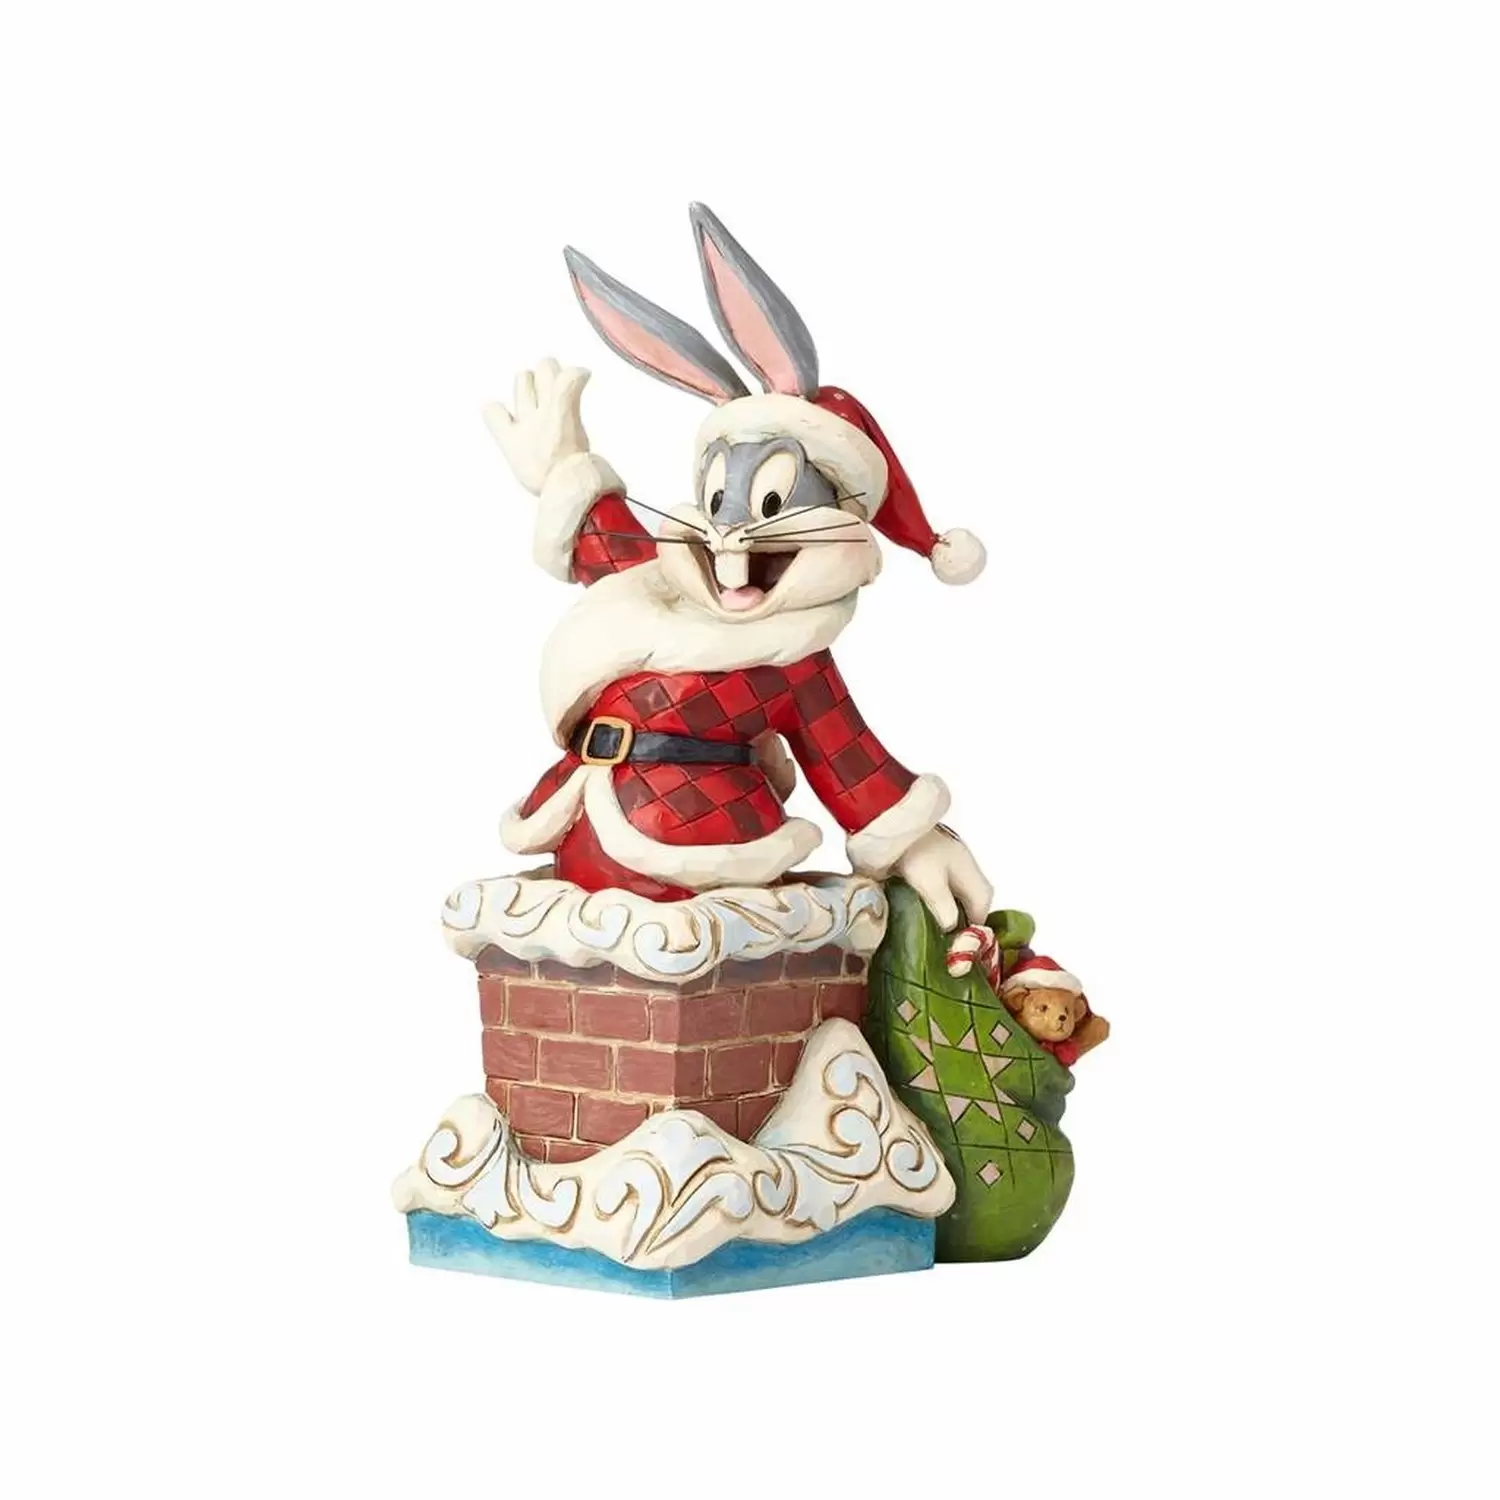 Looney Tunes characters by Jim Shore - Up on the Roof Top - Santa Bugs Bunny